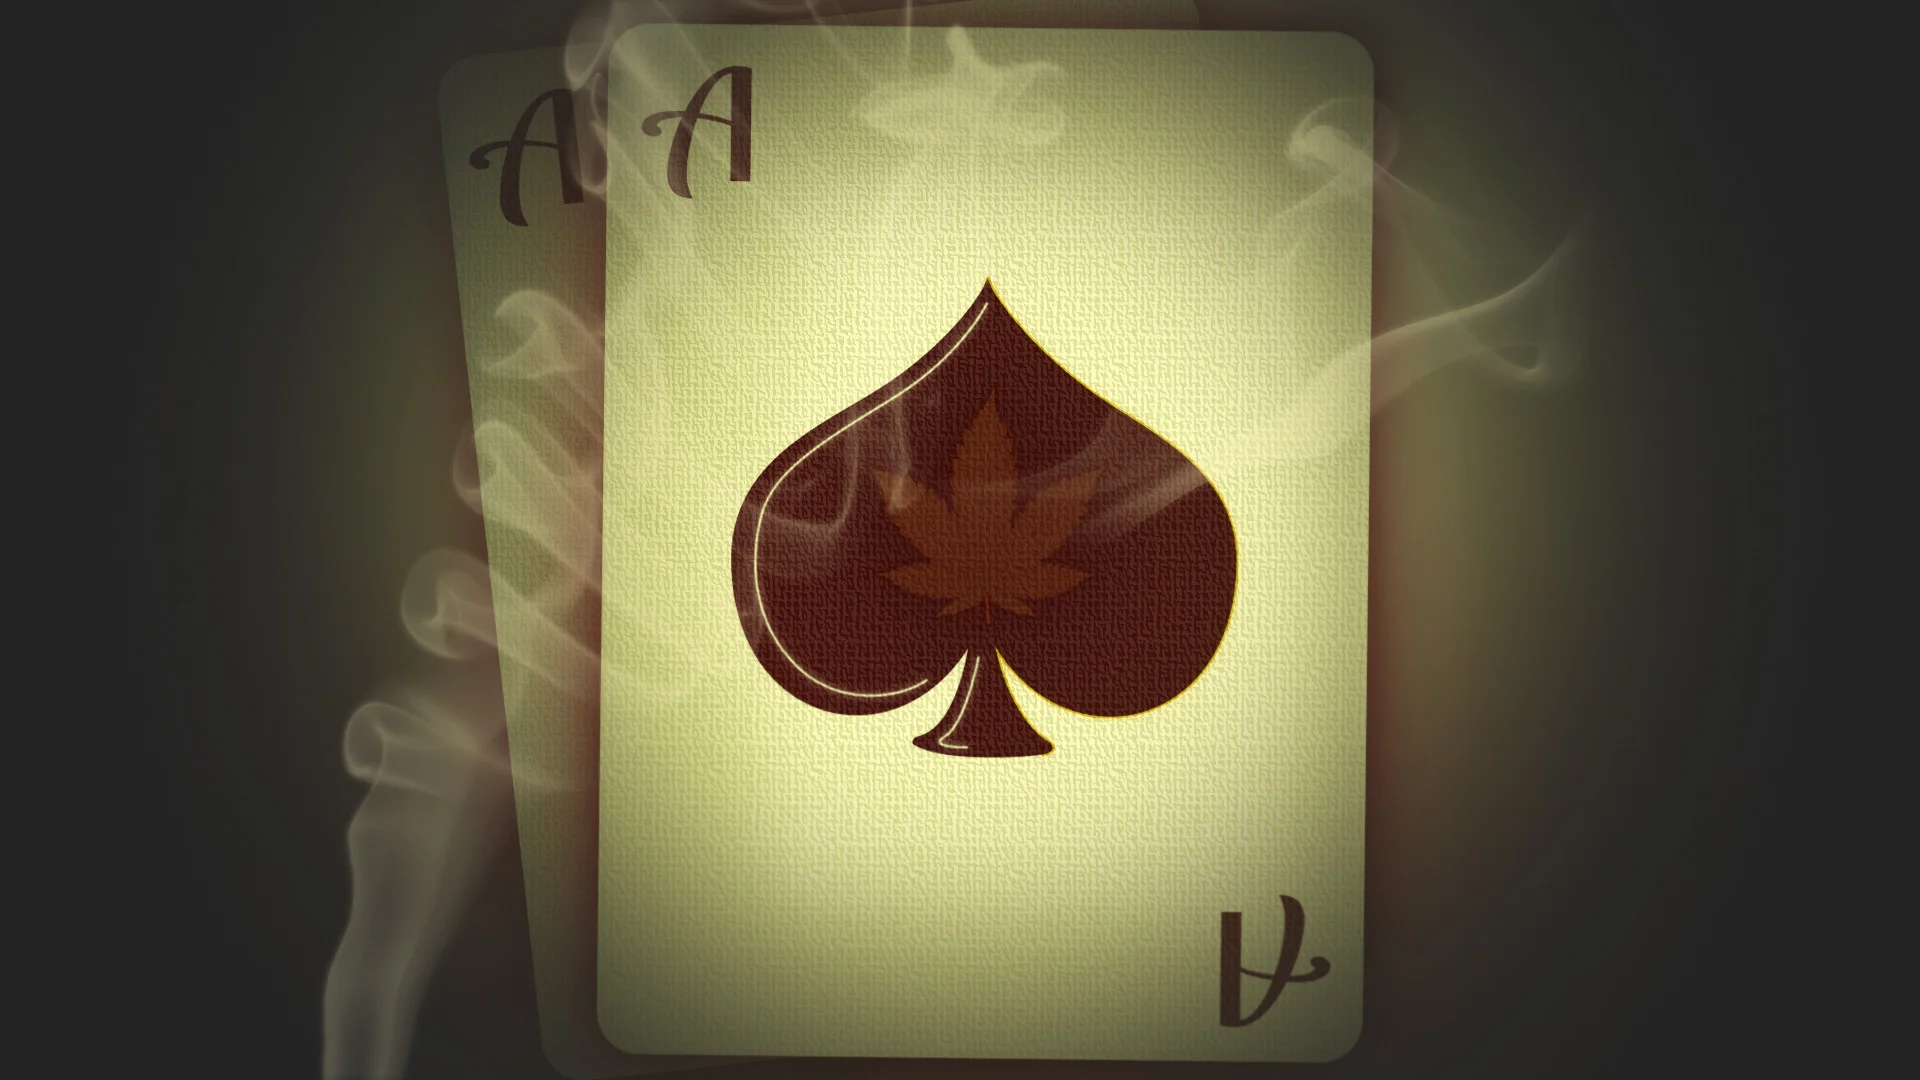 420 Ace of Spades Wallpaper 1920×1080 x post from / r / trees